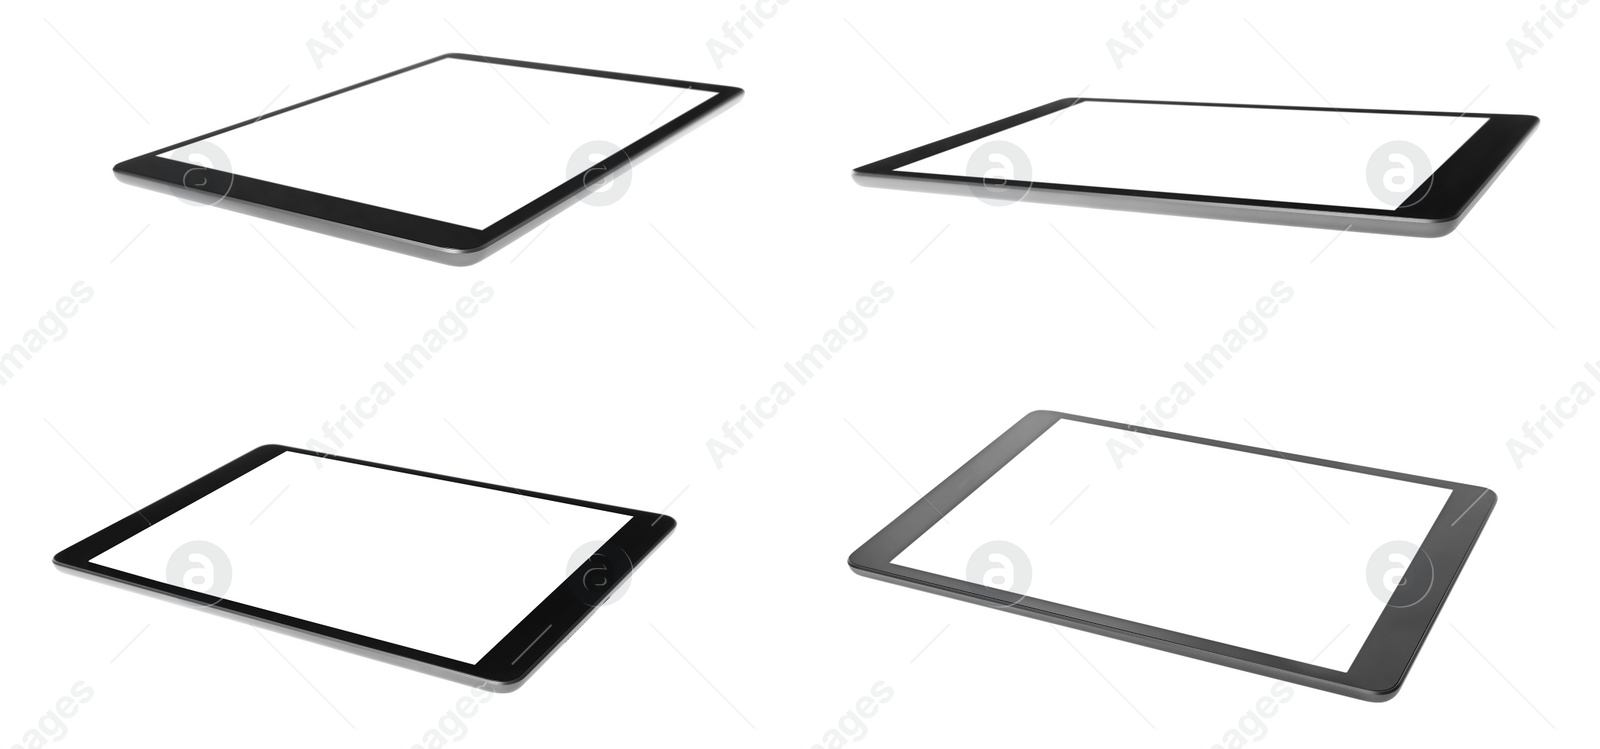 Image of Set of tablet computers on white background. Banner design